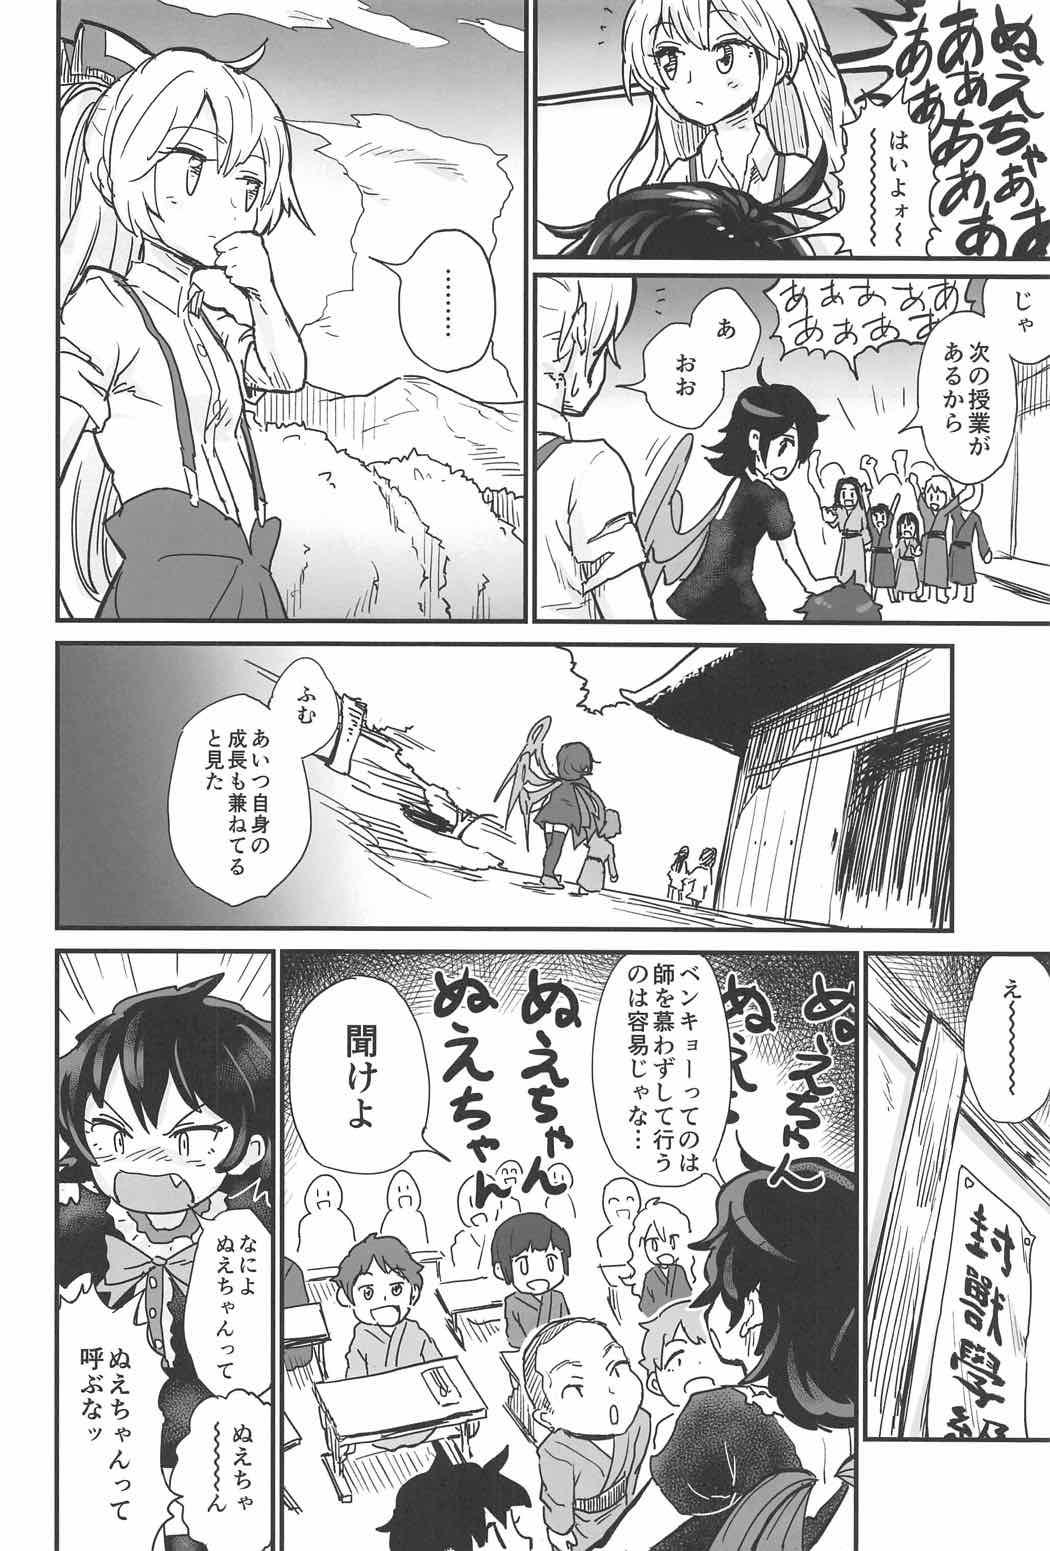 Best Blowjobs Ever Nue to Shounen - Touhou project Celebrity Sex Scene - Page 5